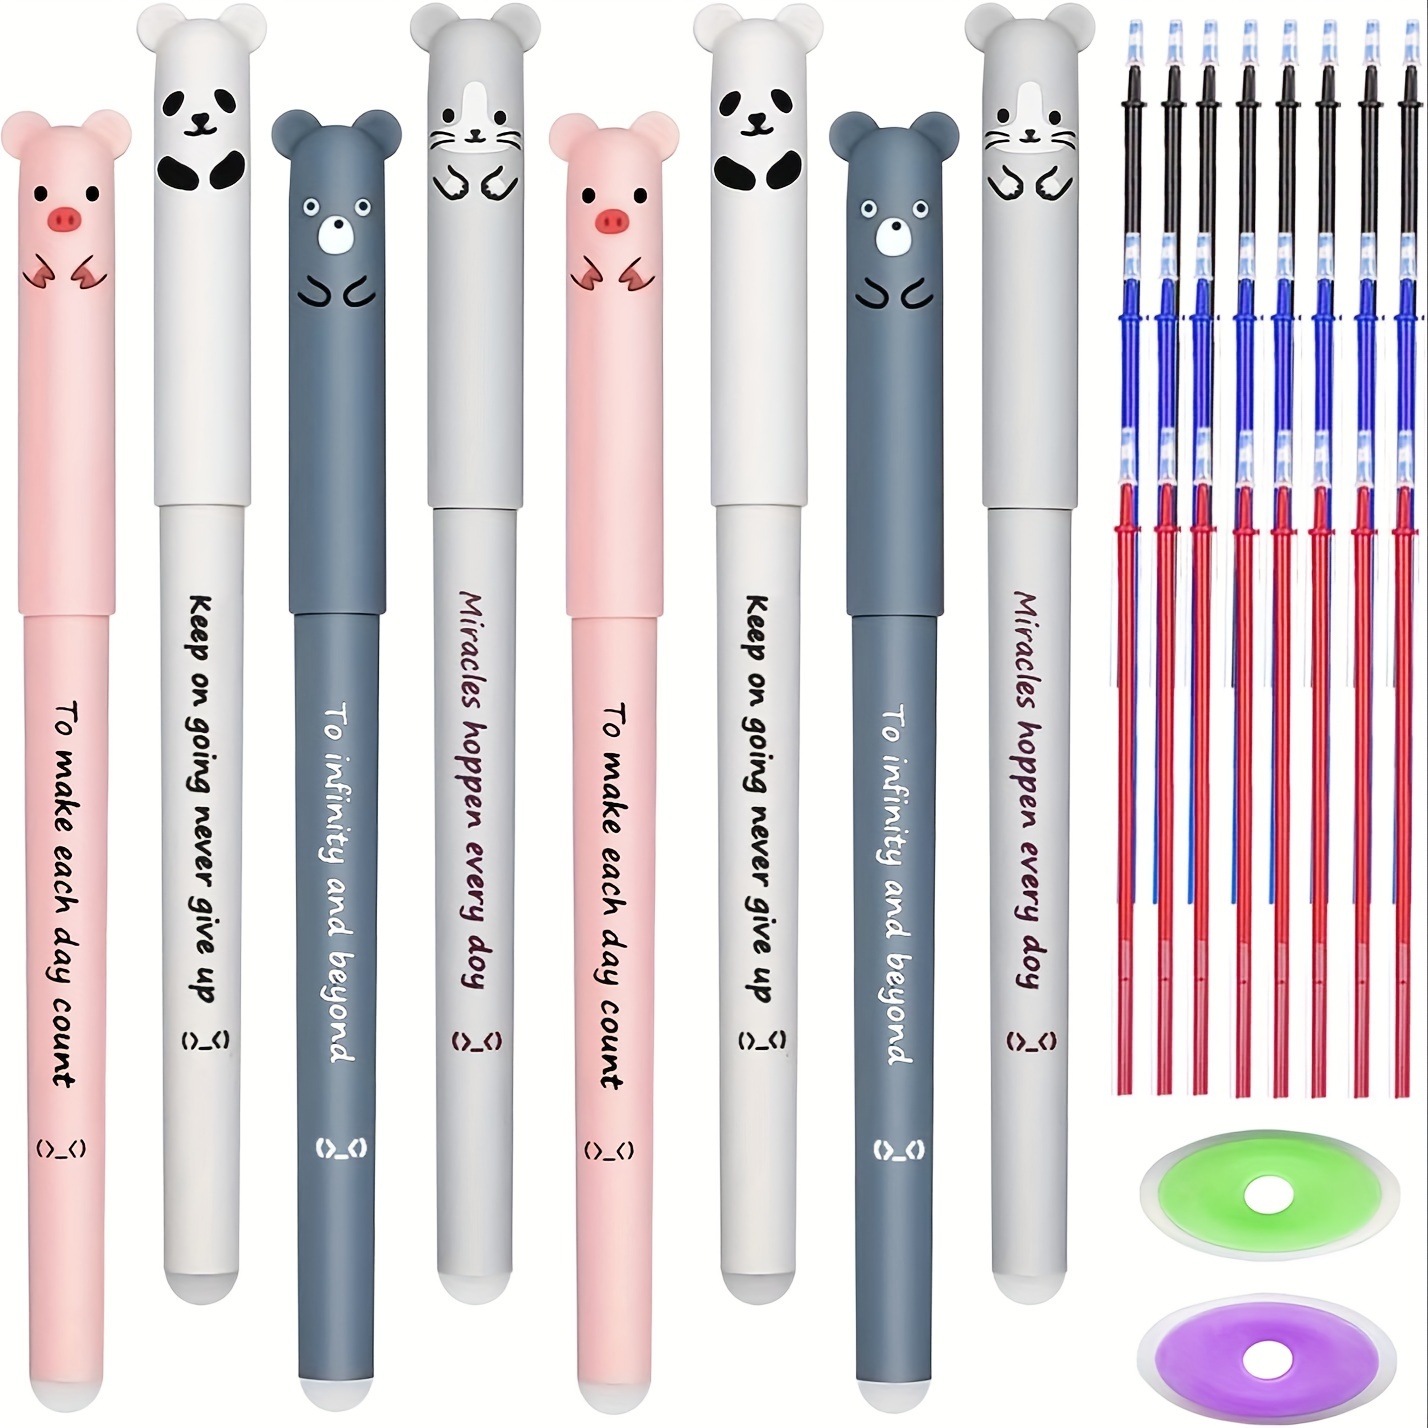 

8pcs Kawaii Cute Erasable Gel Pens, Animal Rubbing Pens With 24 Refills + 2 Erasers (0.35mm) For Office Supplies School Stationery